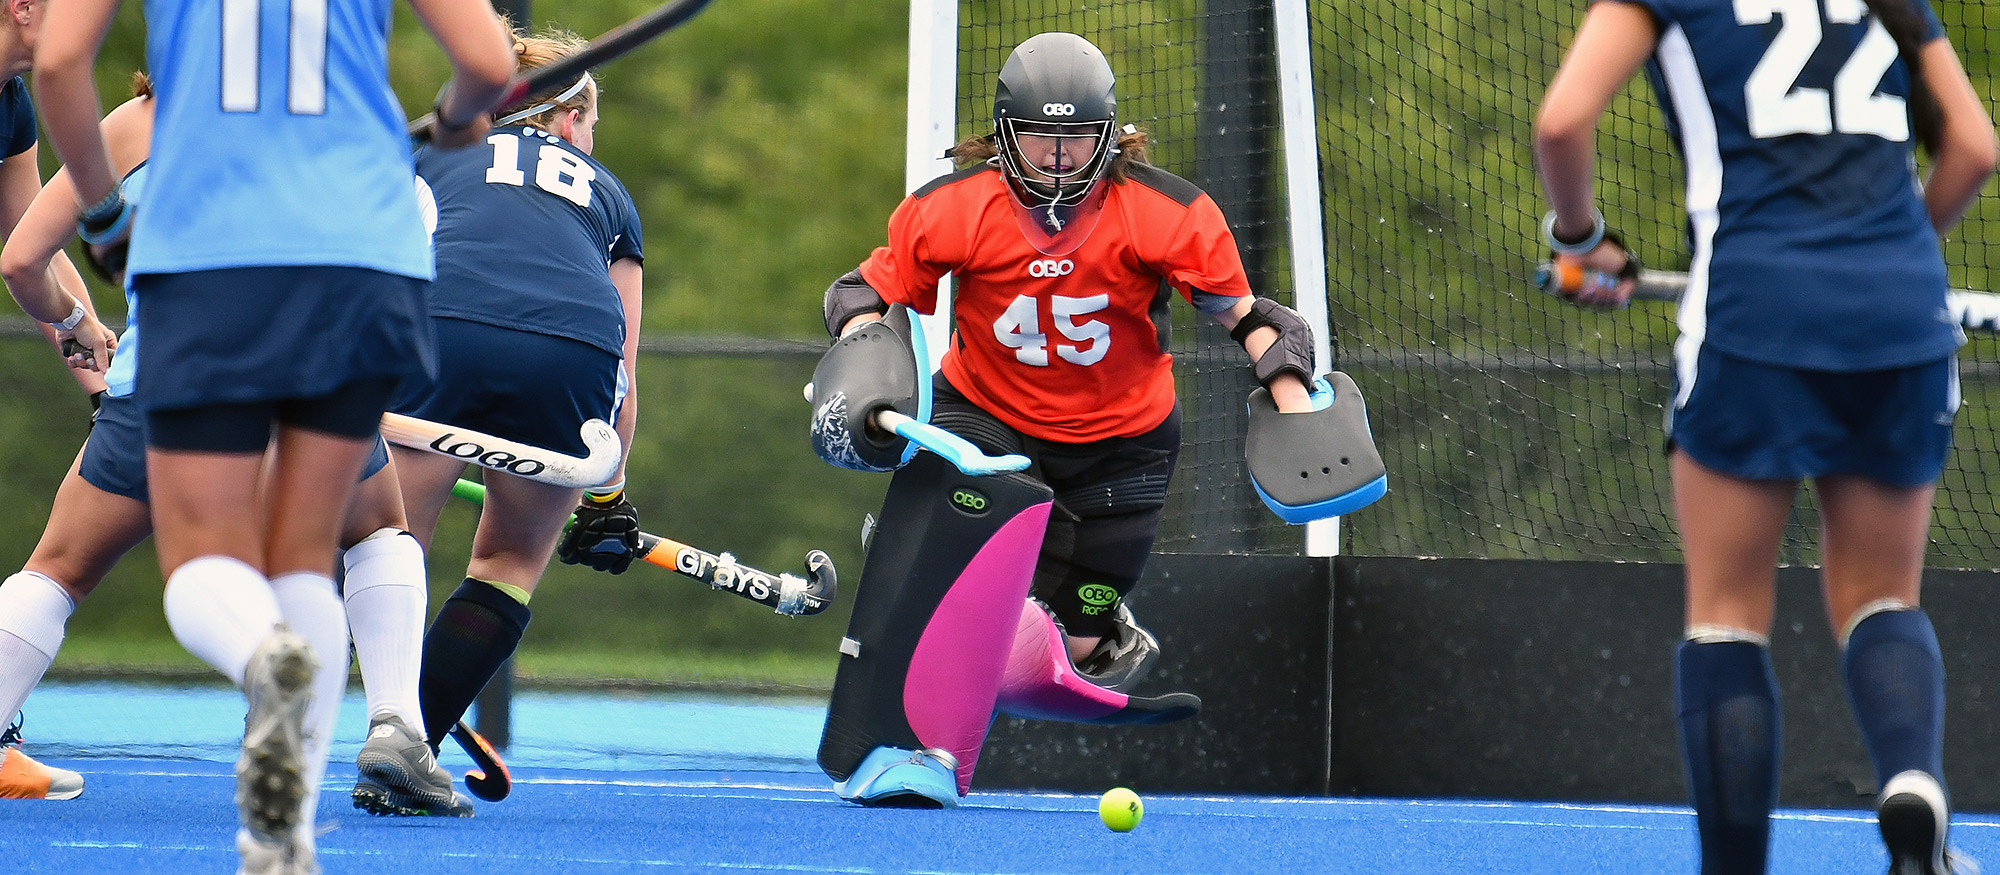 Rachel Katzenberg led a stout defensive effort with 17 saves in Mount Holyoke's loss to No. 12 MIT on Oct. 8, 2022. (RJB Sports file photo)